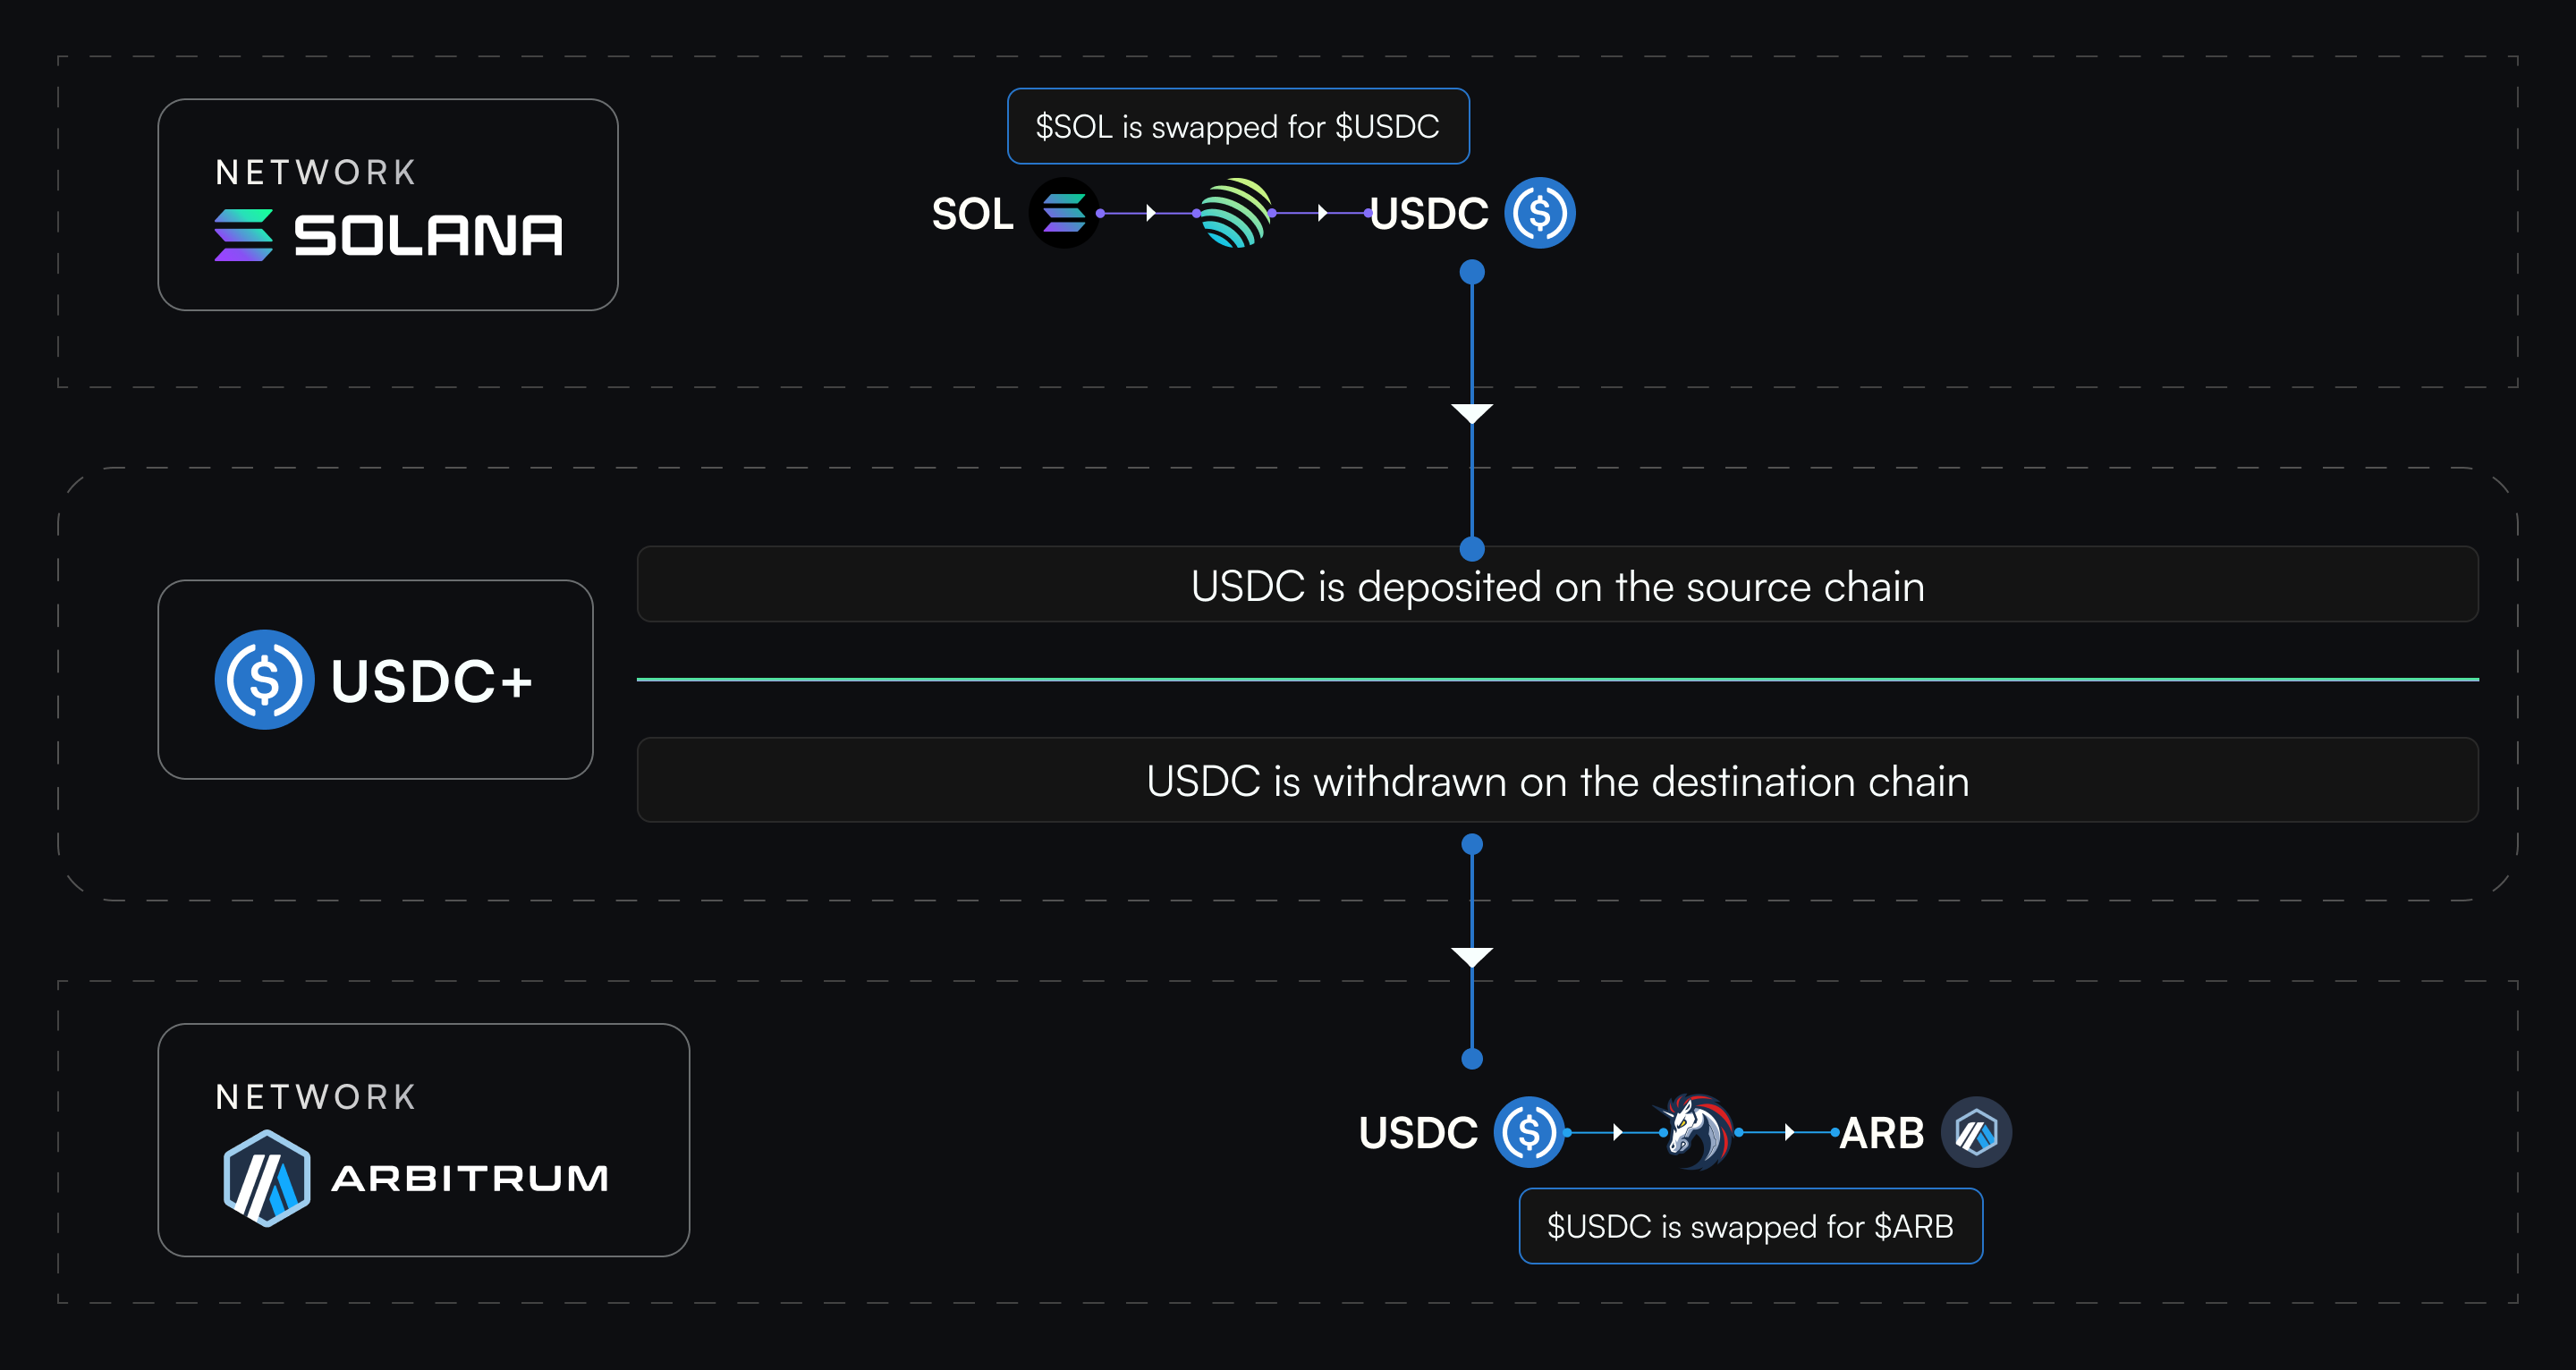 An example flow of a user sending $SOL from Solana to receive $ARB on Arbitrum.